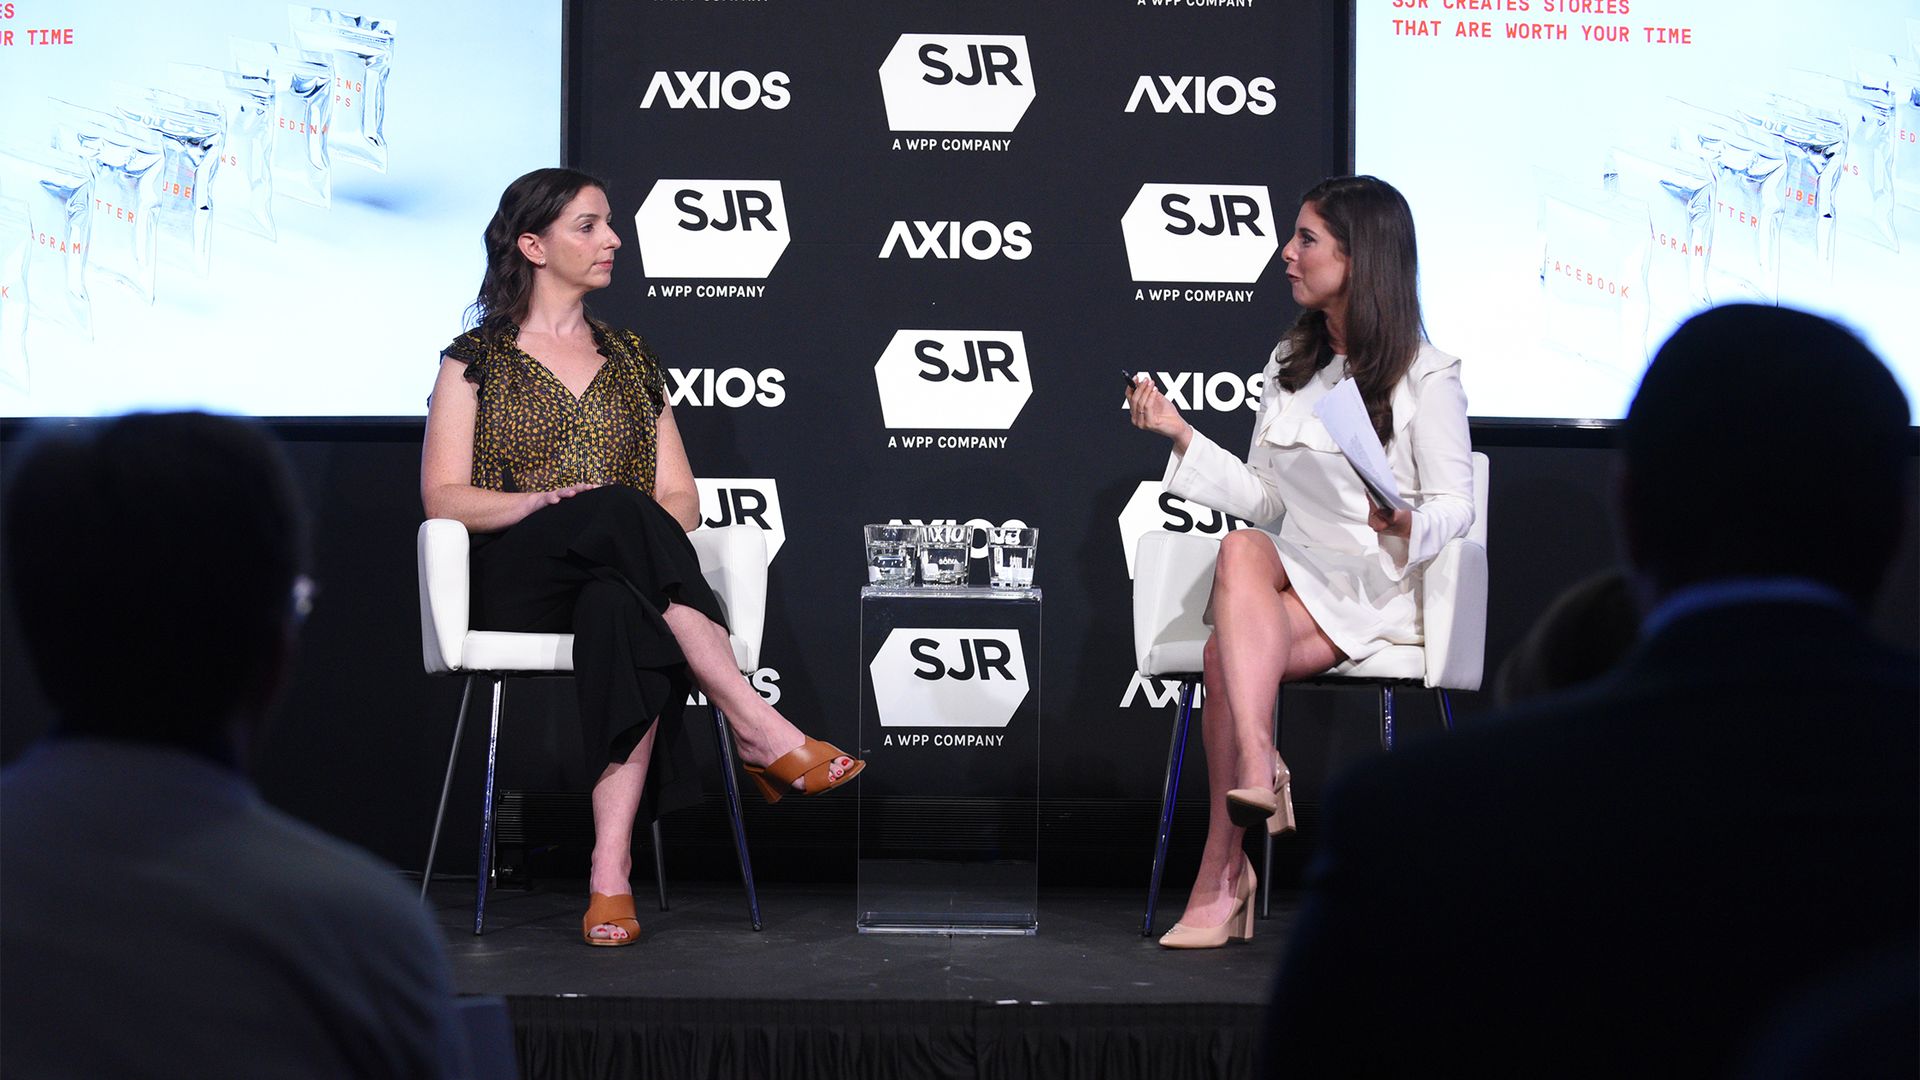 Axios' Sara Fischer in conversation with Carolyn Tisch Blodgett, Senior Vice President and Head of Global Marketing at Peloton.